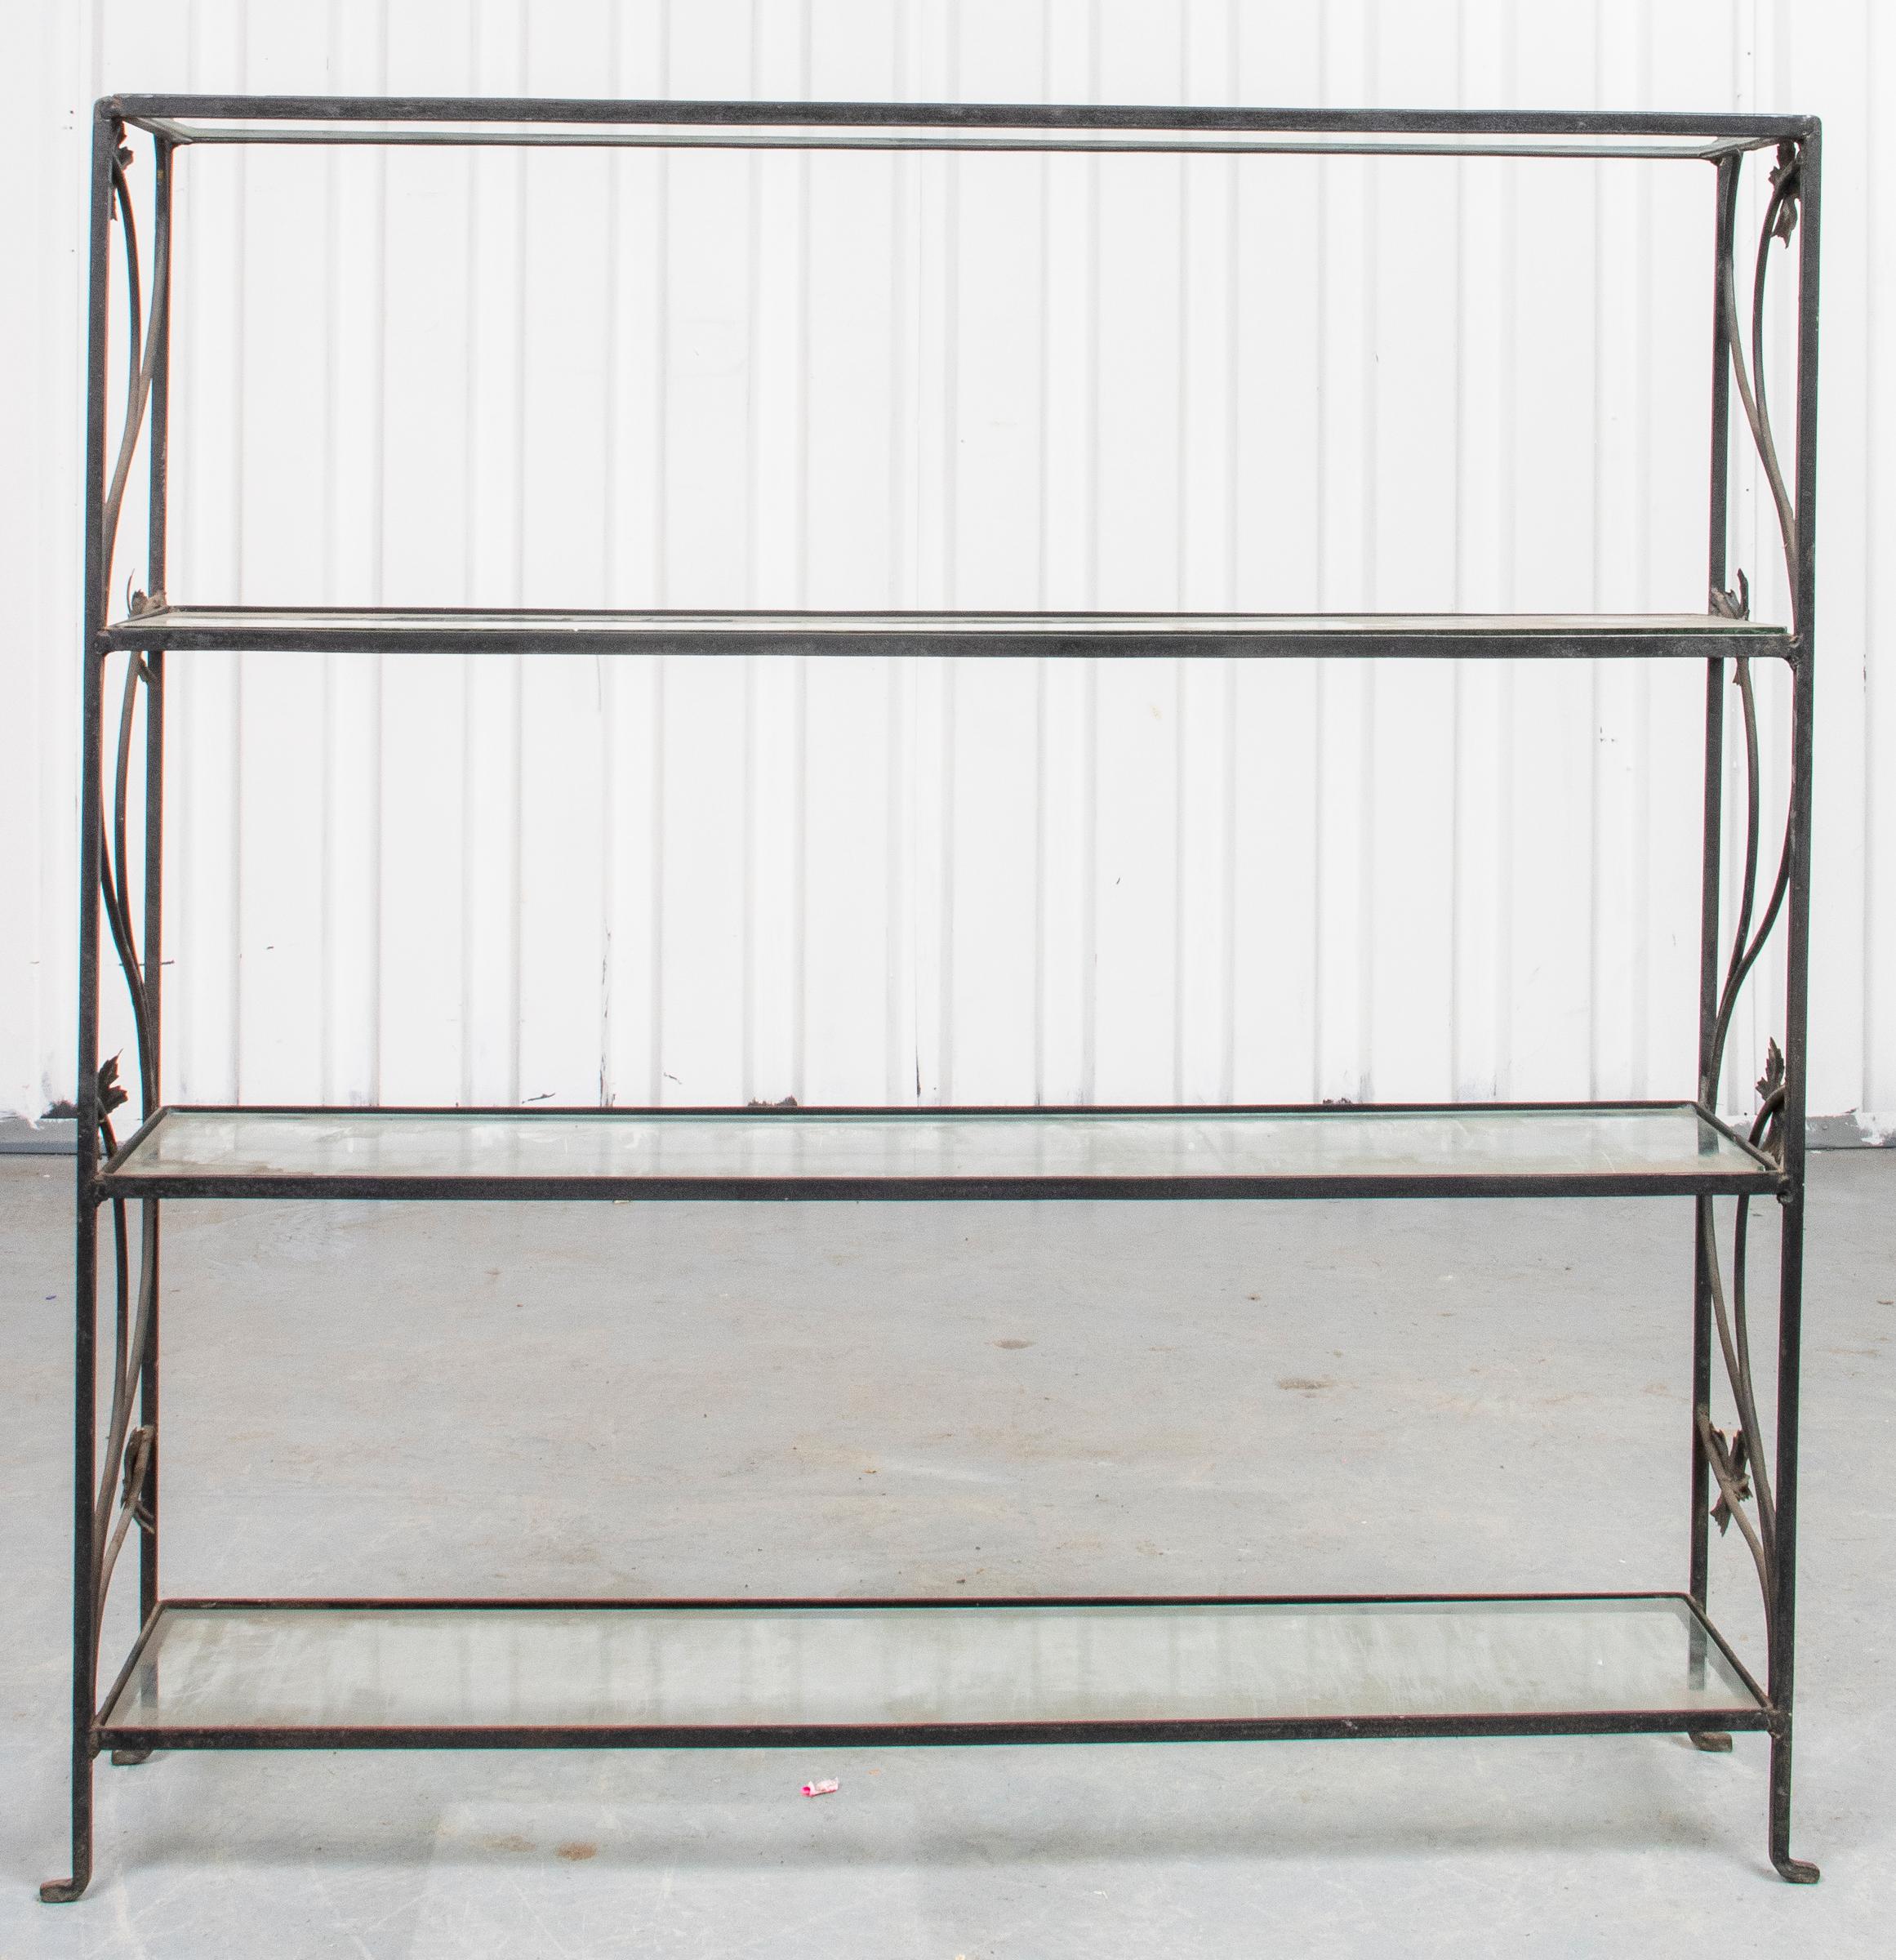 Modern wrought iron four tier étagère with foliate motif on the sides and glass shelves. Measures: 38.5” H x 37.5” W x 9” D.